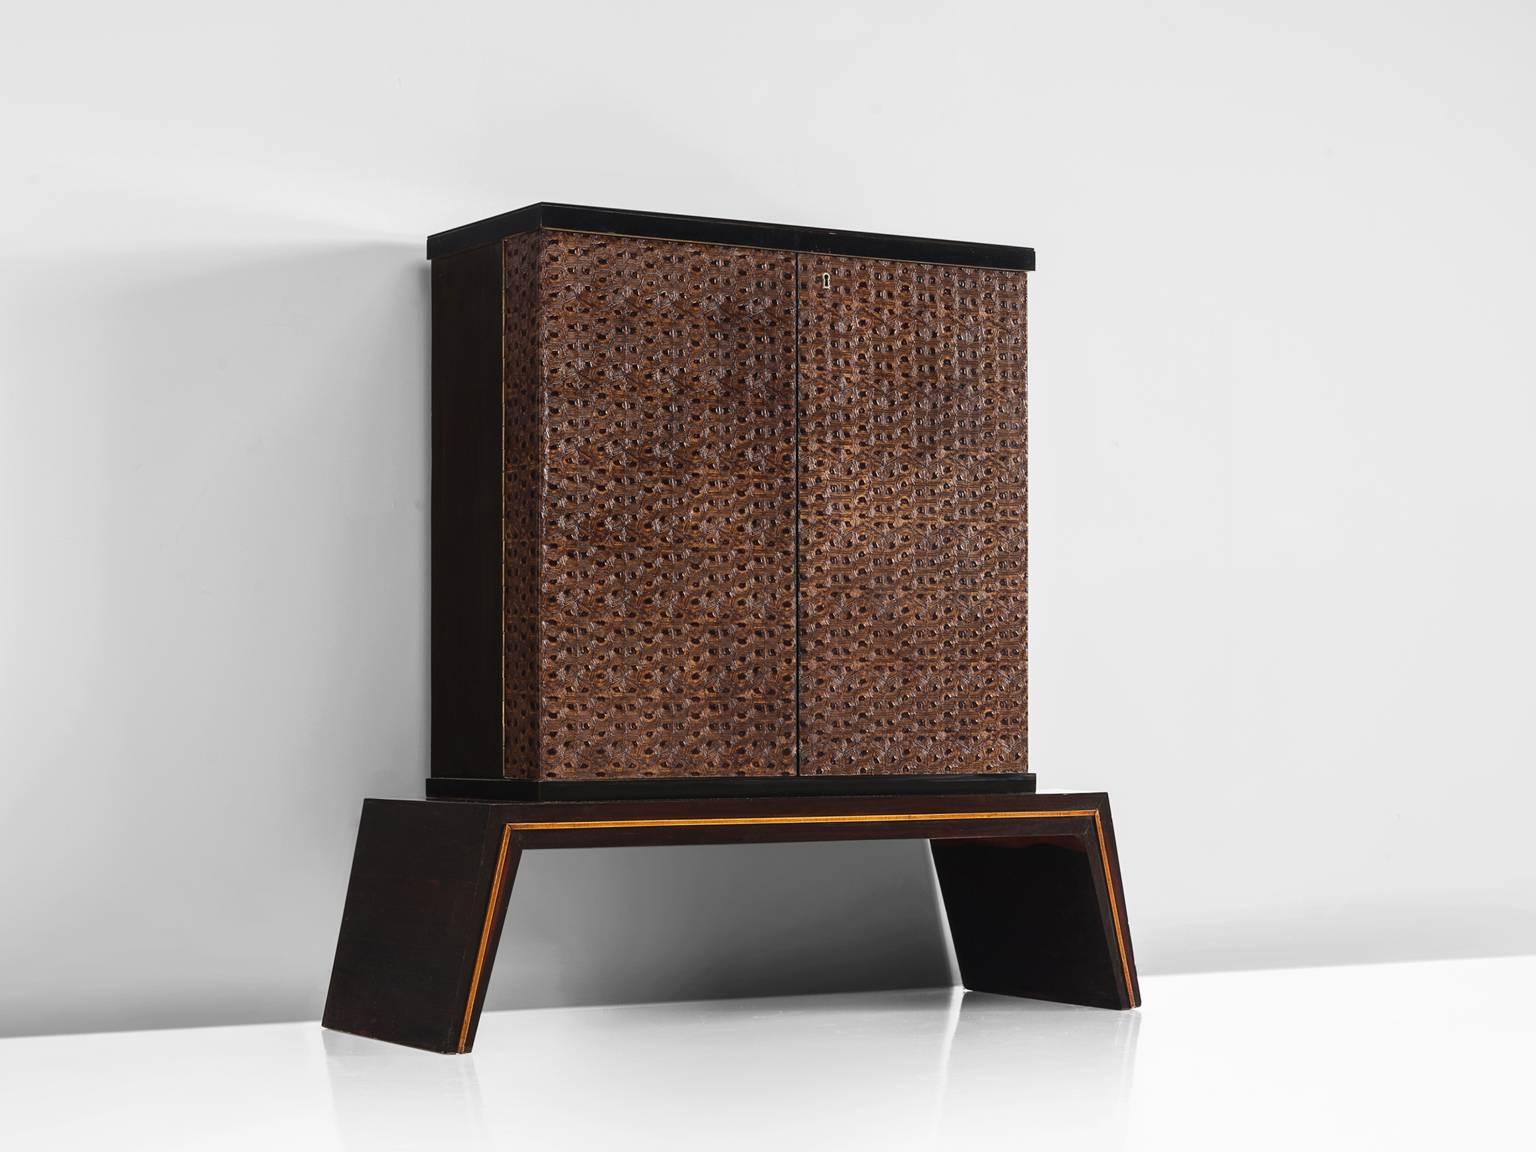 Dry bar, leather, wood, mirror, Italy, 1950s.

This exquisite dry bar is illuminated and has a mirror interior with storage facilities. The front of the cabinet is covered with carved, deep brown carved front. This pattern repeats itself and